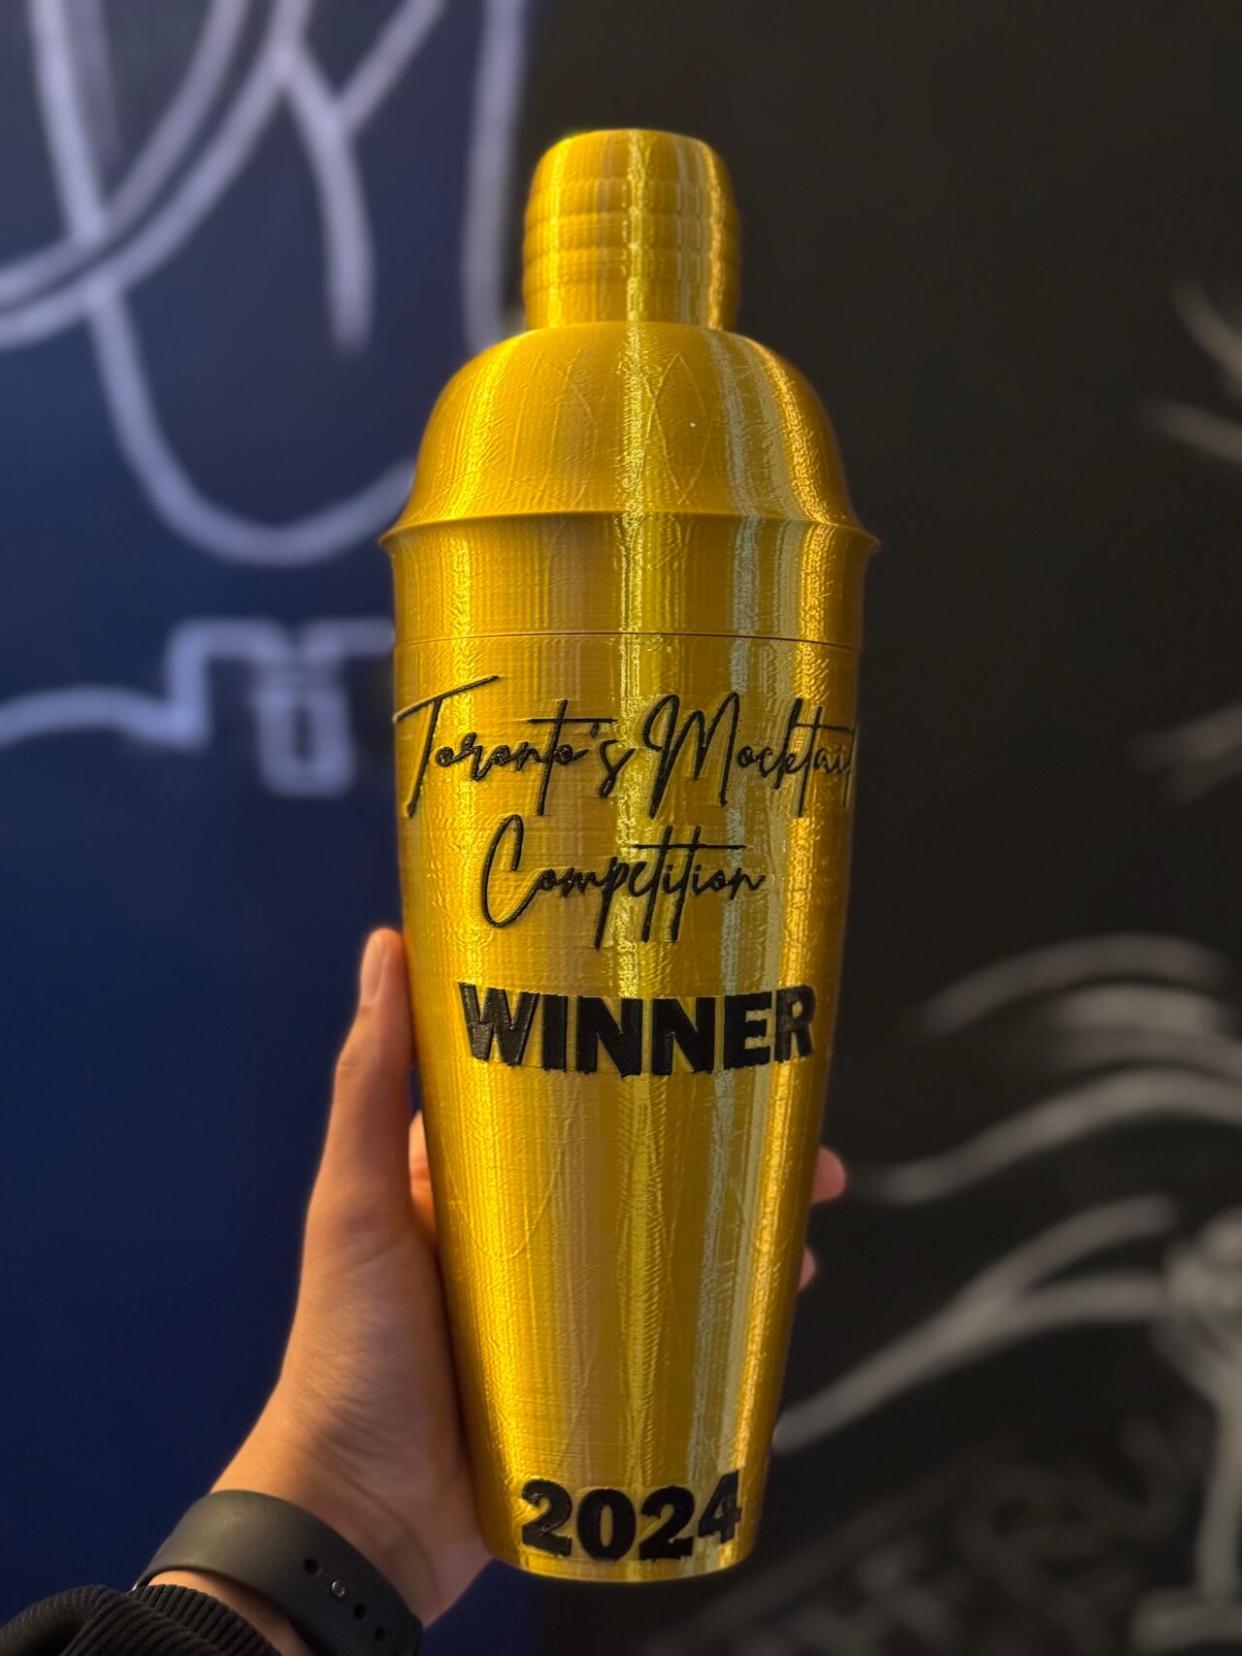 The winner of Saturday's competition will receive this cocktail shaker trophy. (Submitted by Sobar Social Club - image credit)